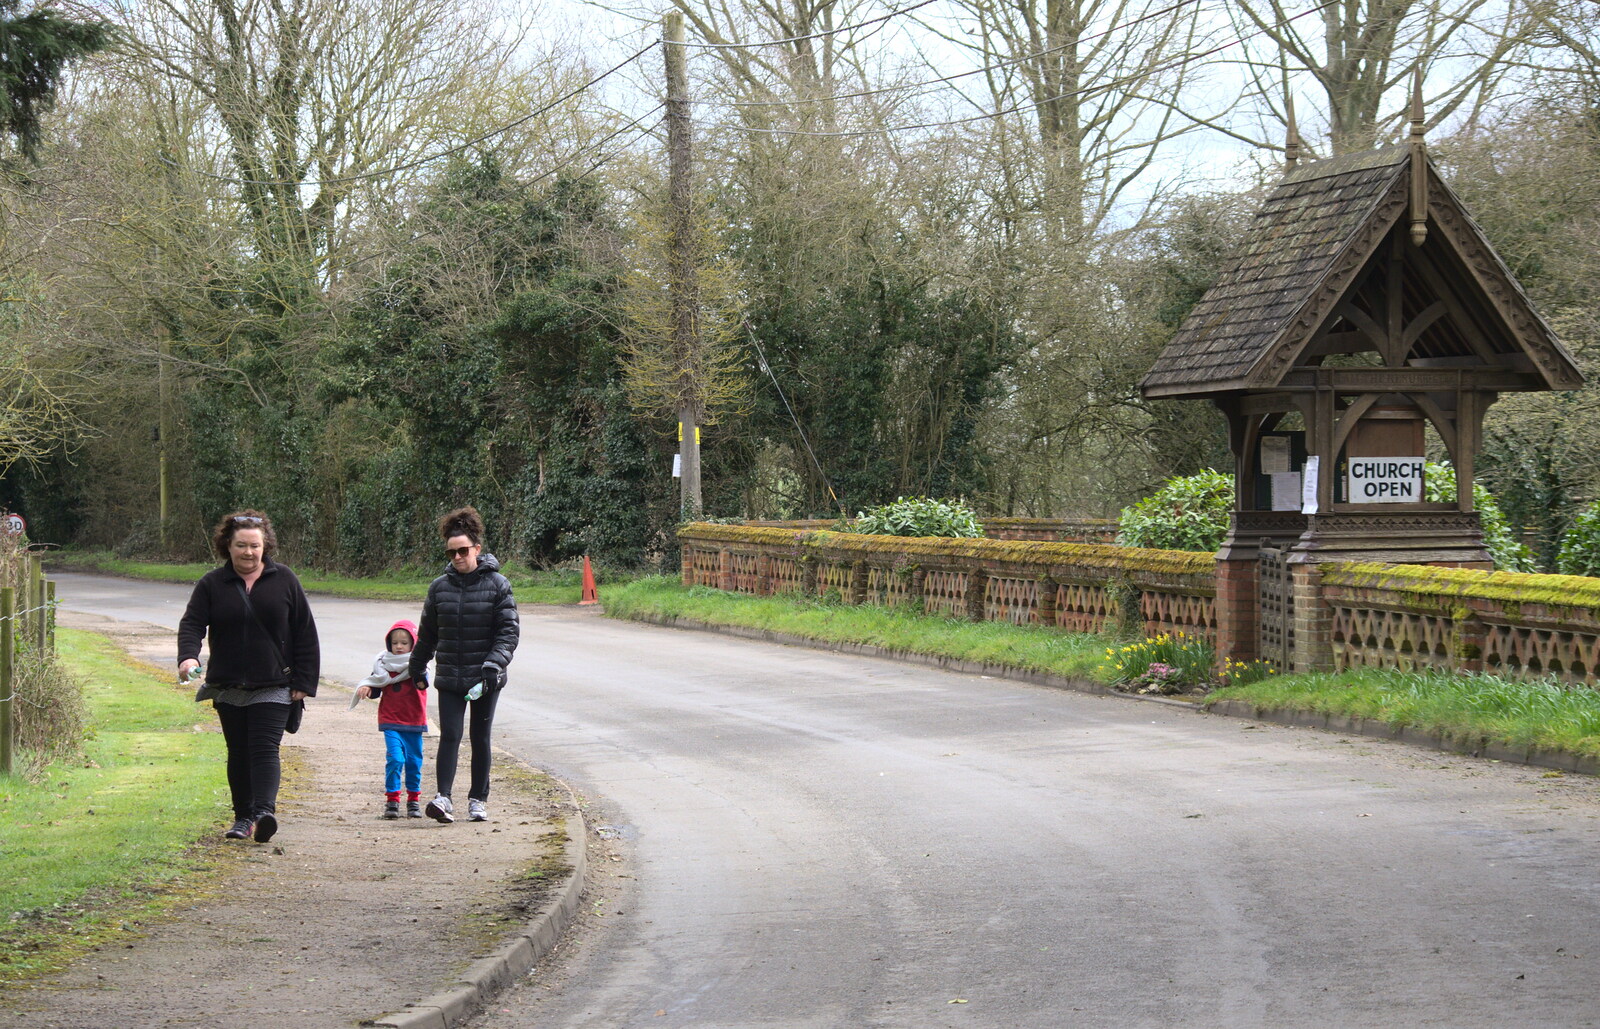 Louise, Harry and Evelyn from Harry's Birthday, Brome, Suffolk - 28th March 2016